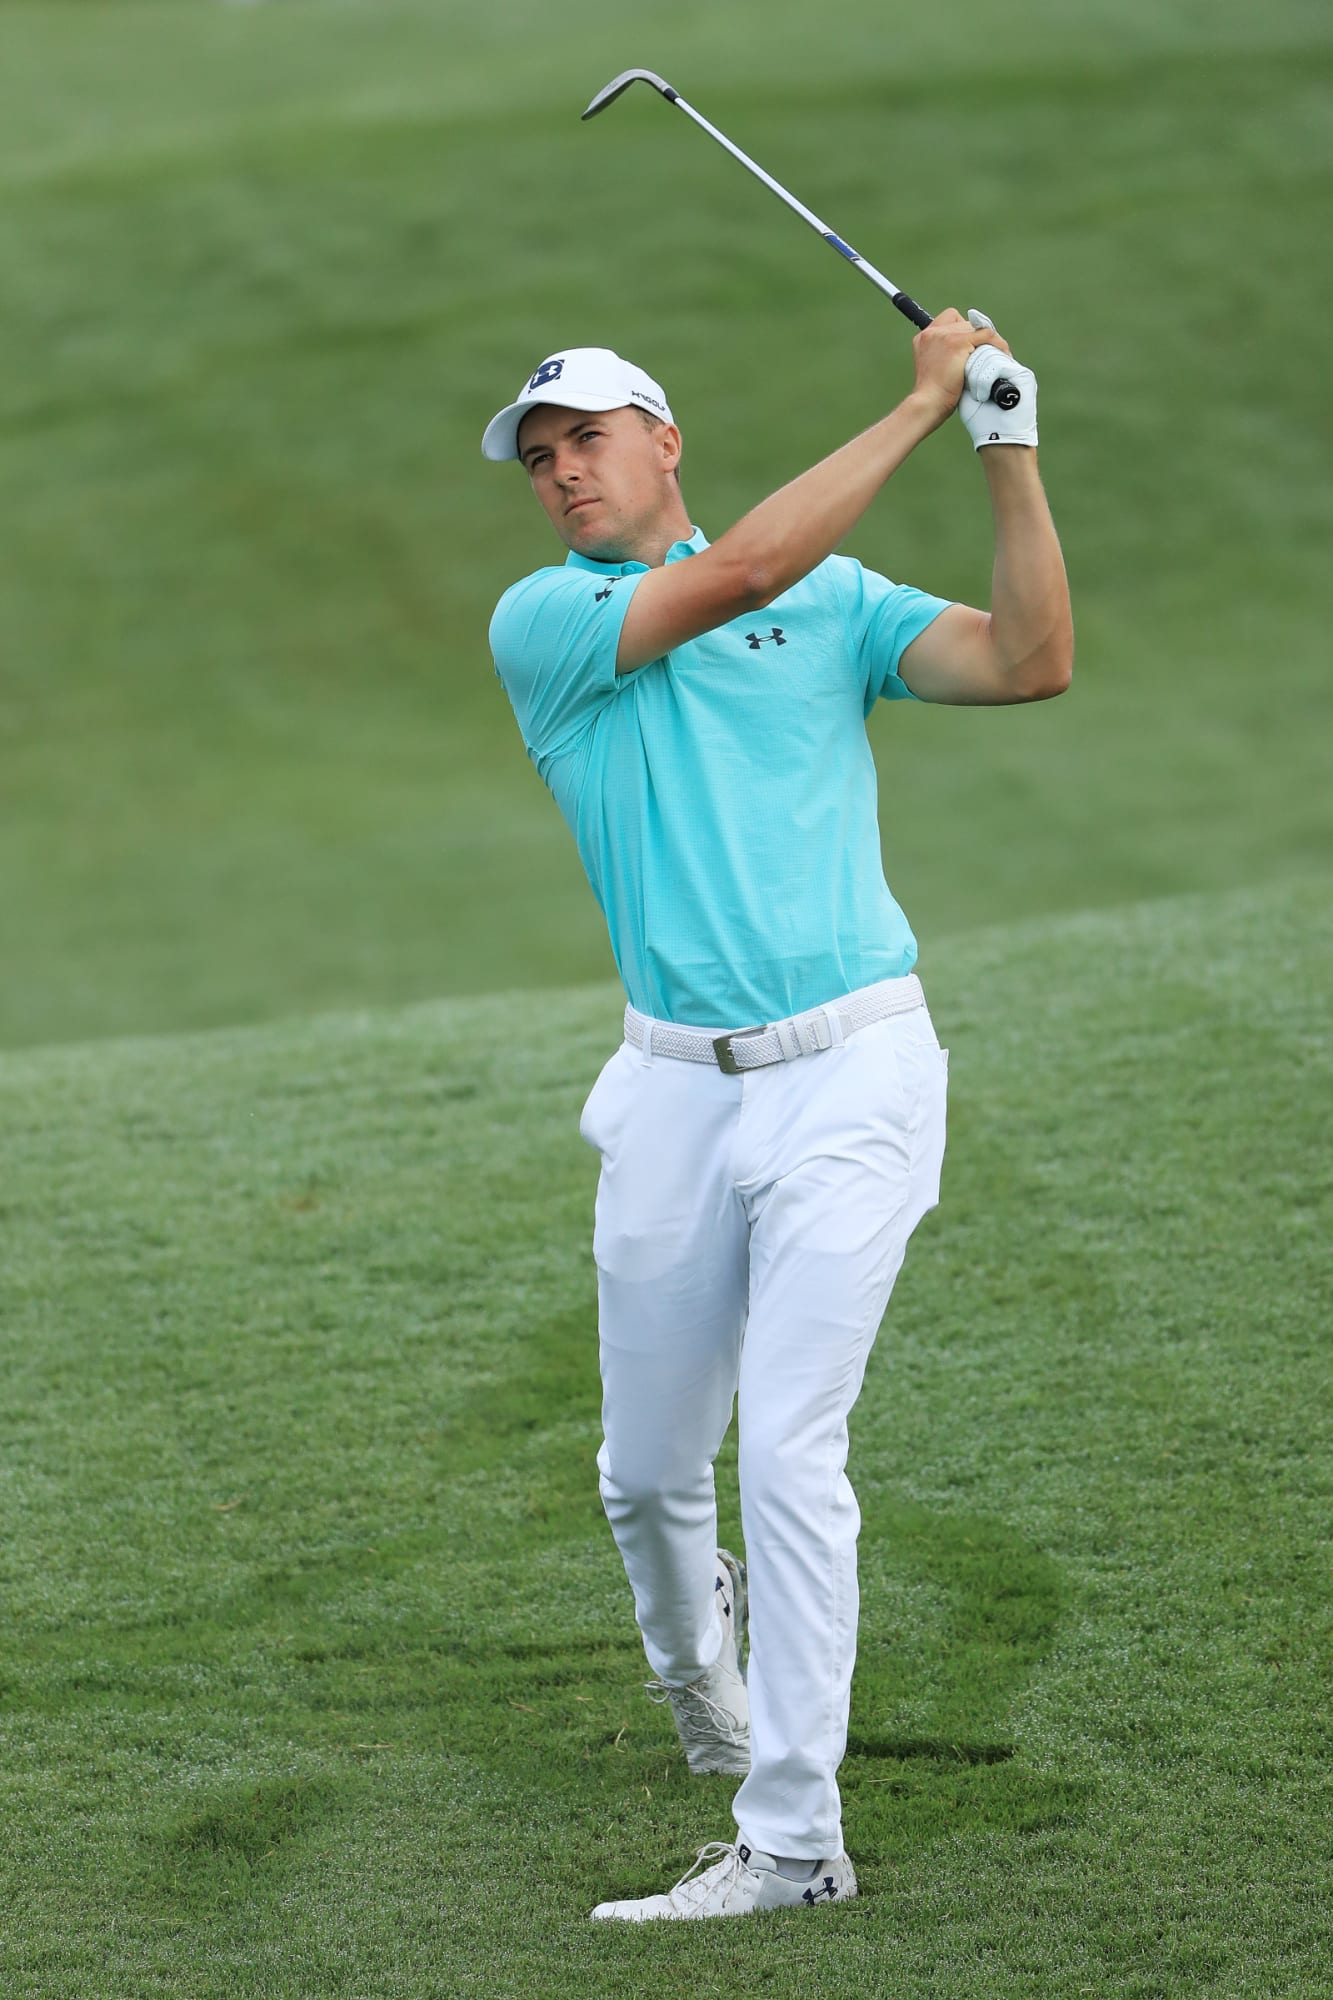 Jordan Spieth finds his putter, goes low at THE PLAYERS Championship